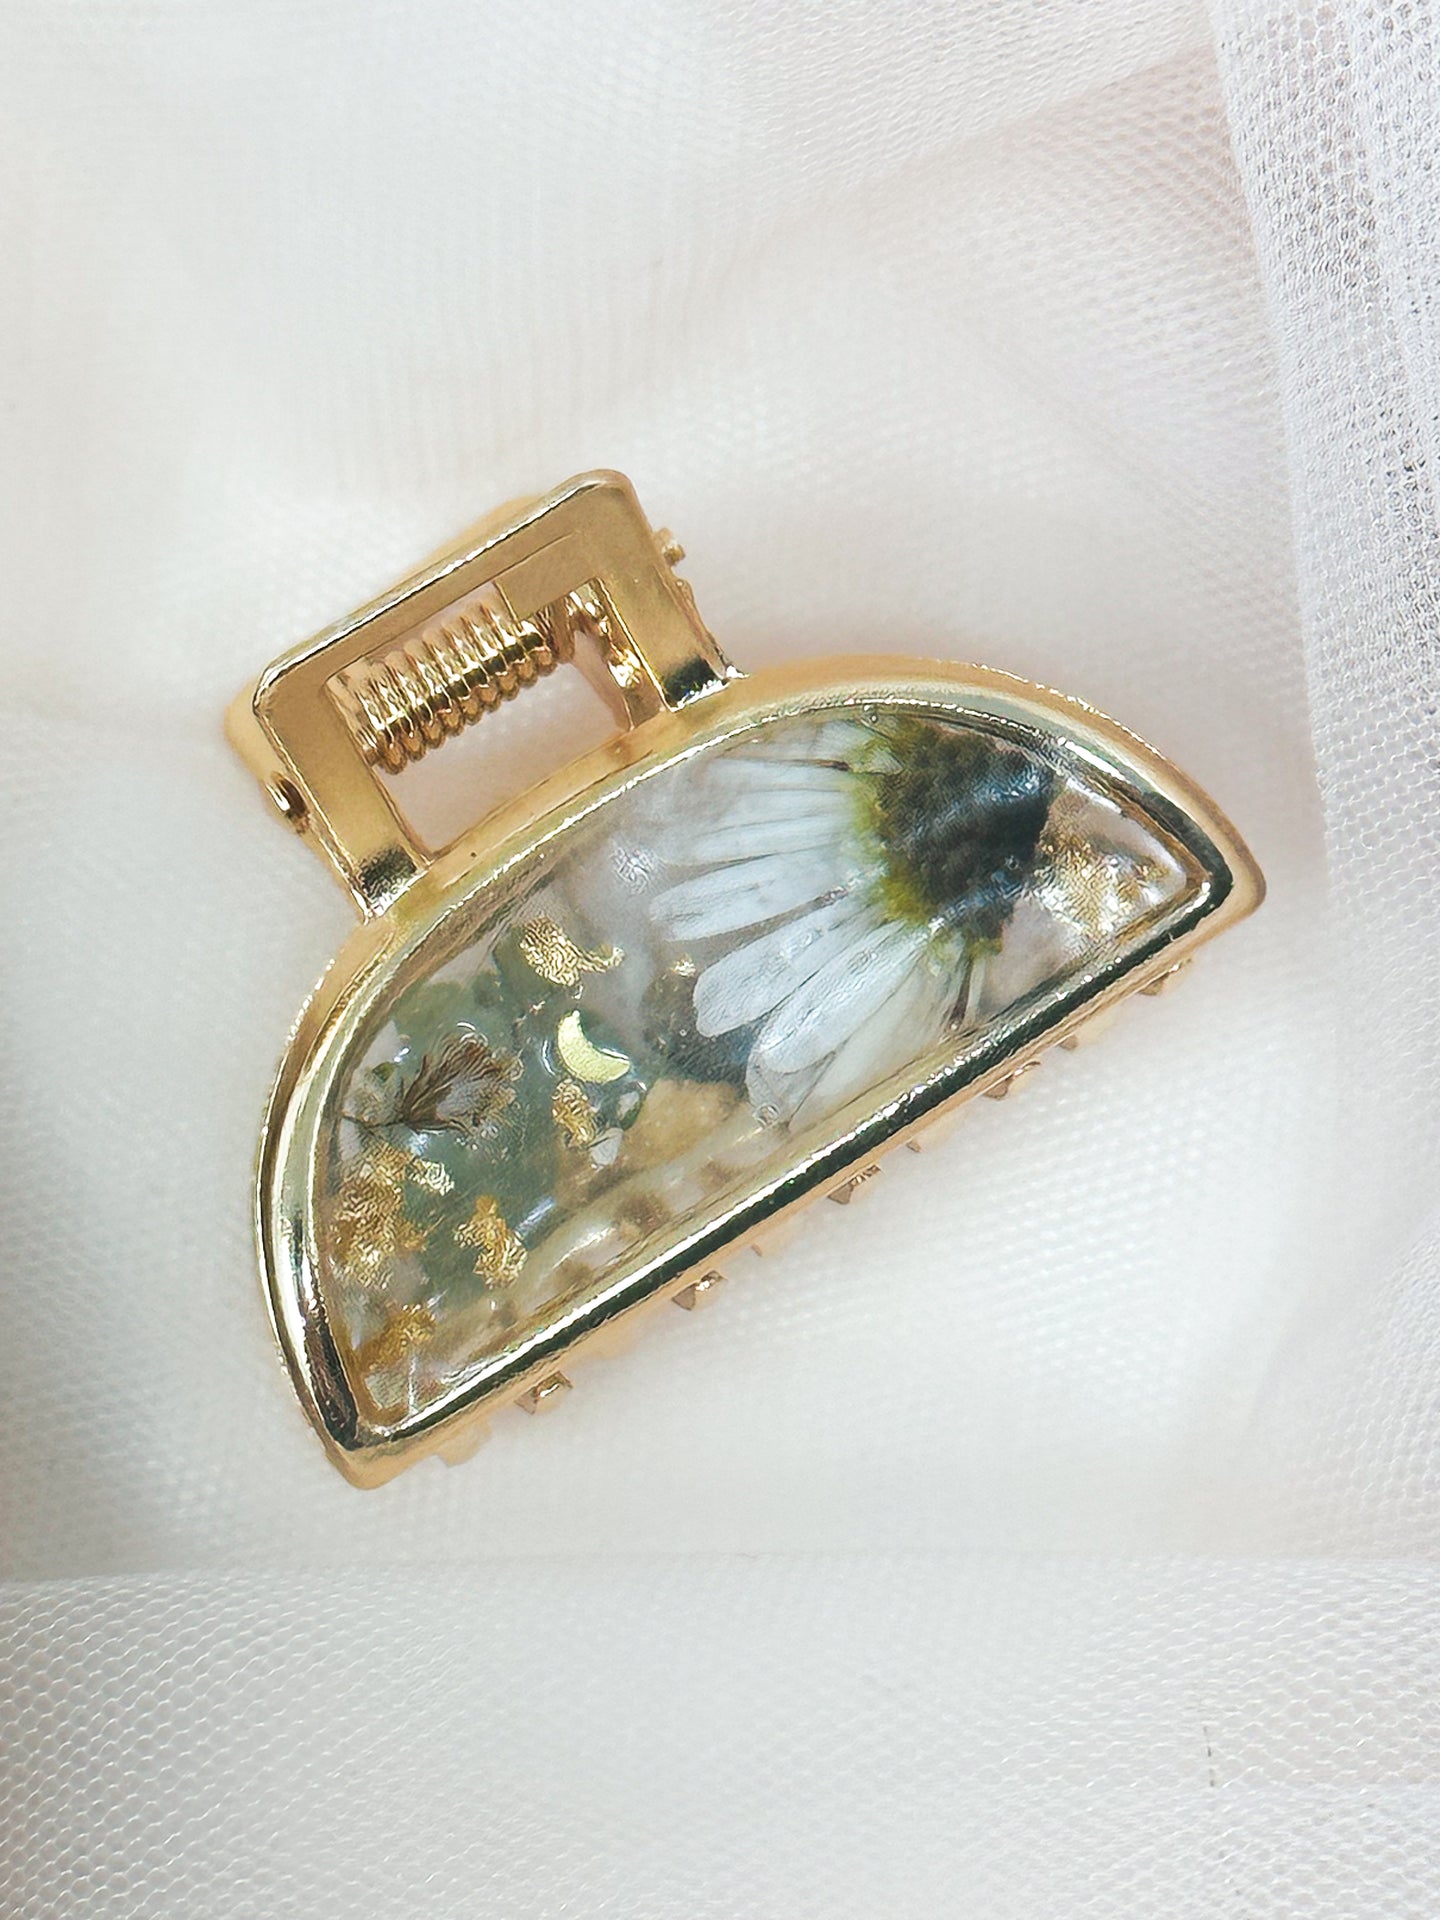 Mini Metal Clip Infused with Real Daisy Flowers in Resin.